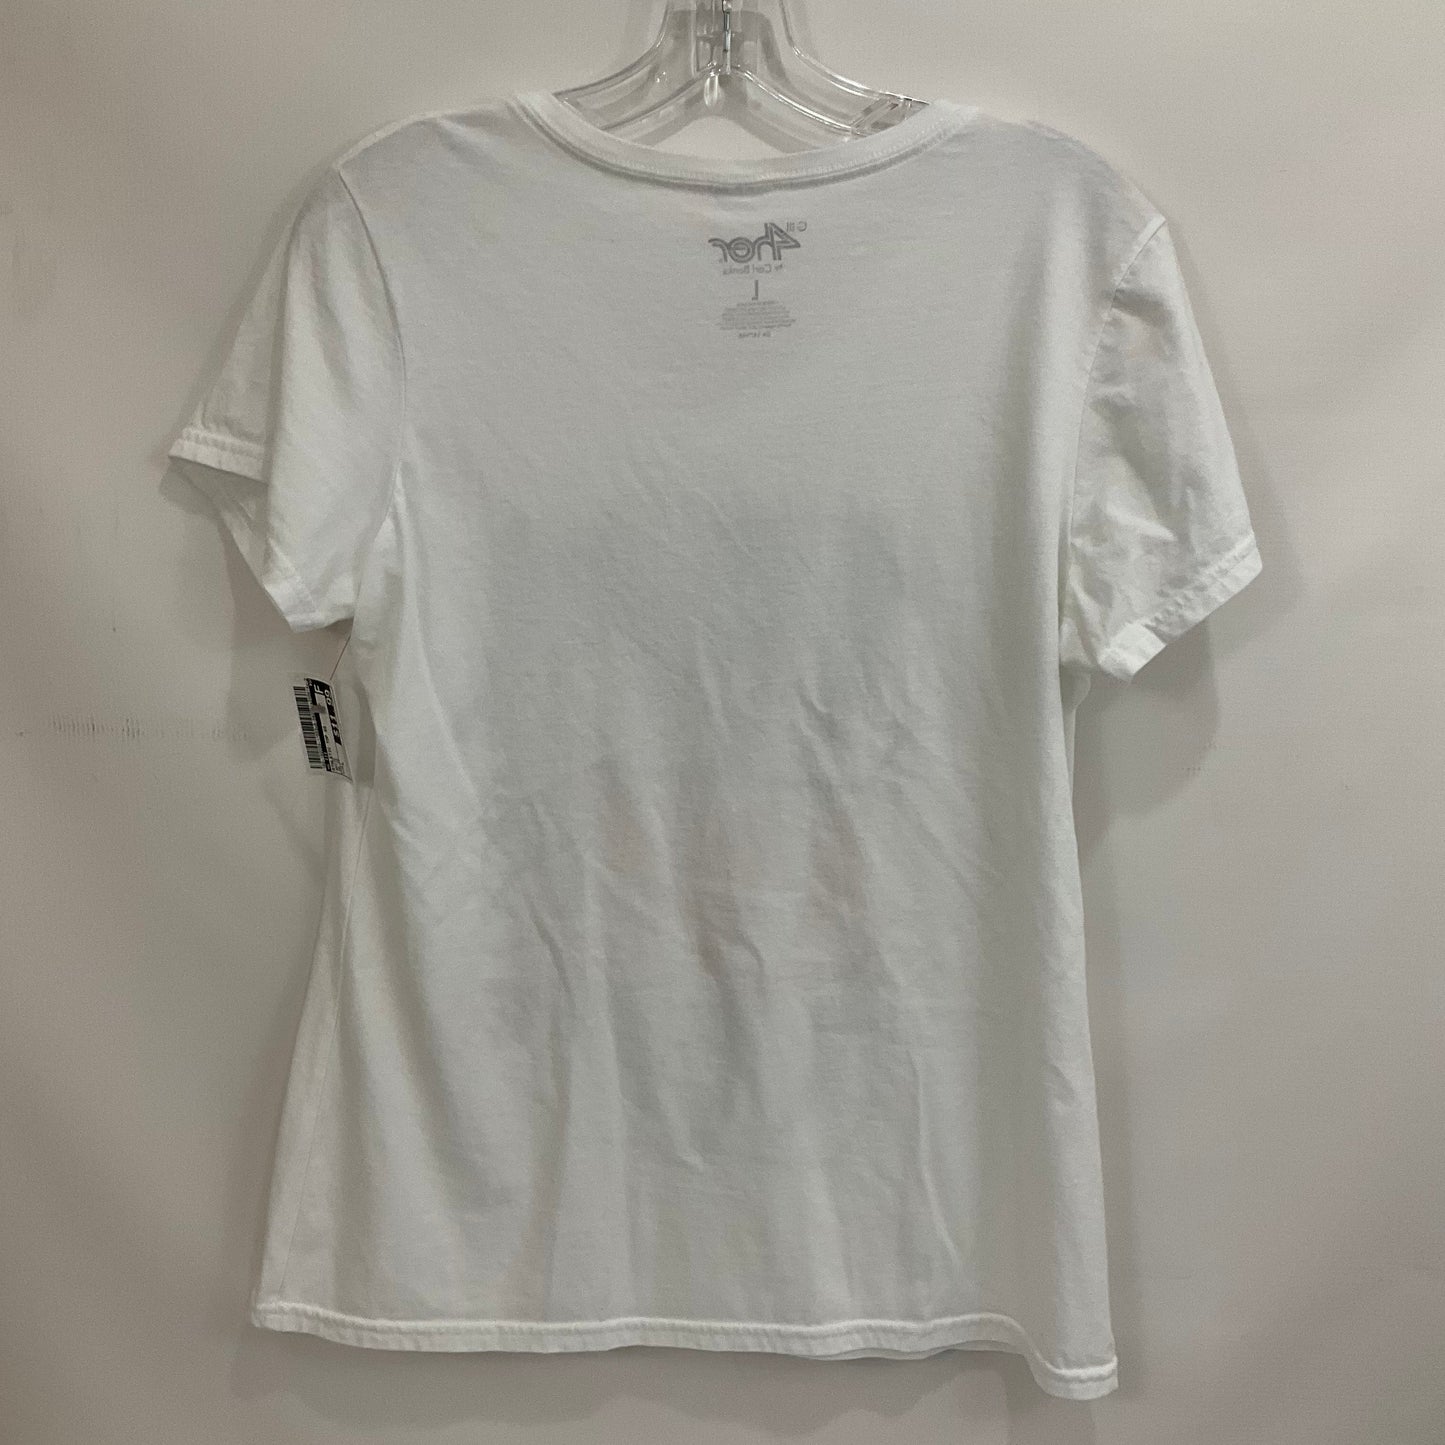 White Athletic Top Short Sleeve G Iii, Size L